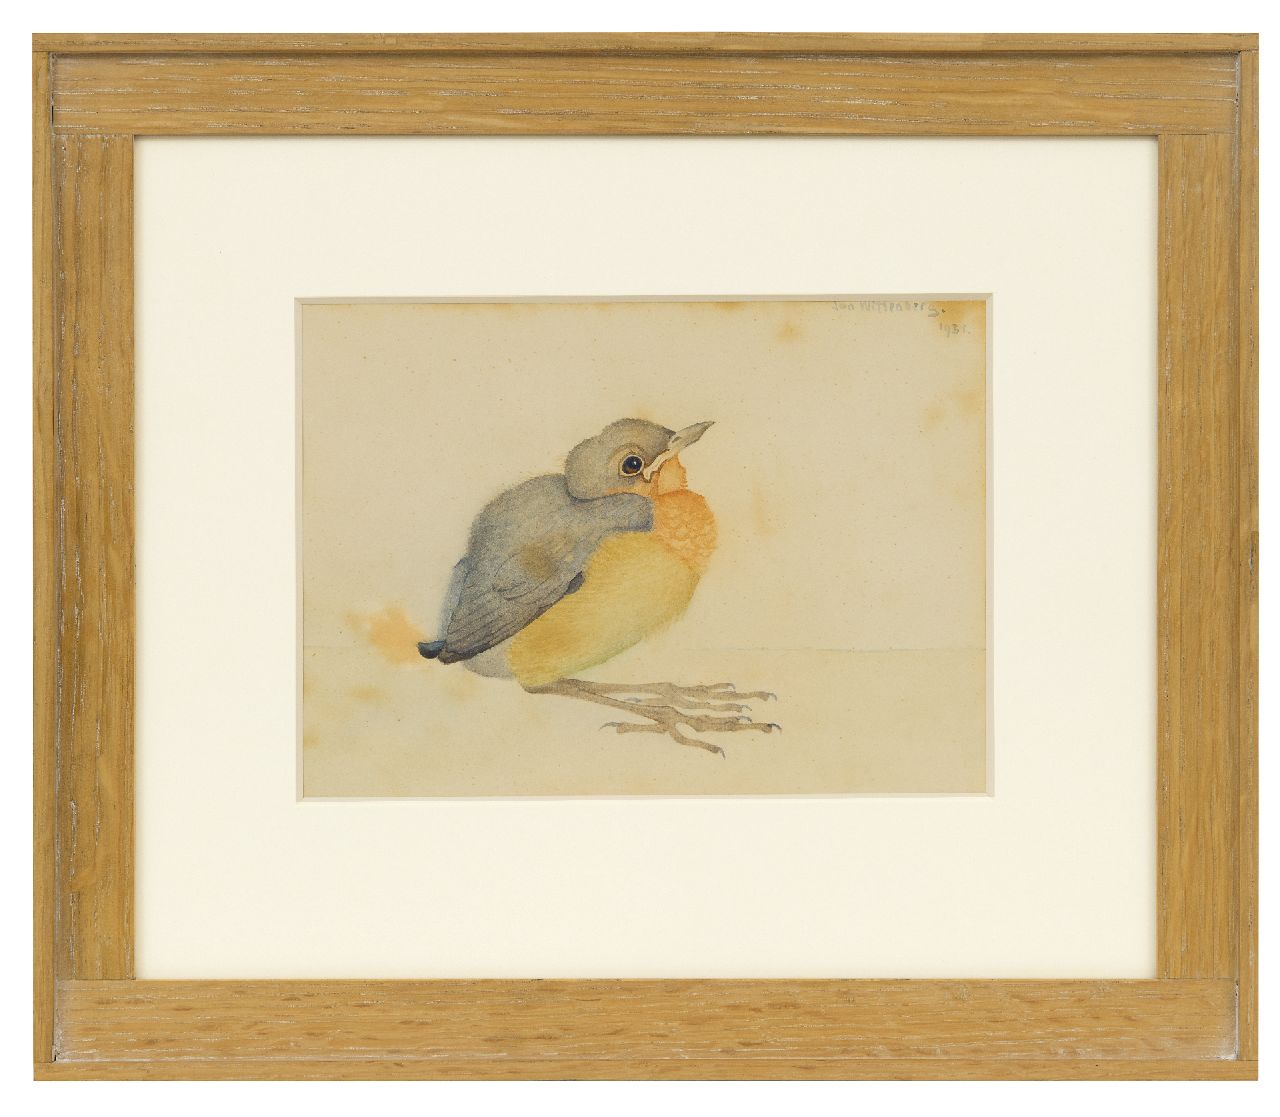 Wittenberg J.H.W.  | 'Jan' Hendrik Willem Wittenberg, A young blackbird, watercolour on paper 13.0 x 18.0 cm, signed u.r. and dated 1931